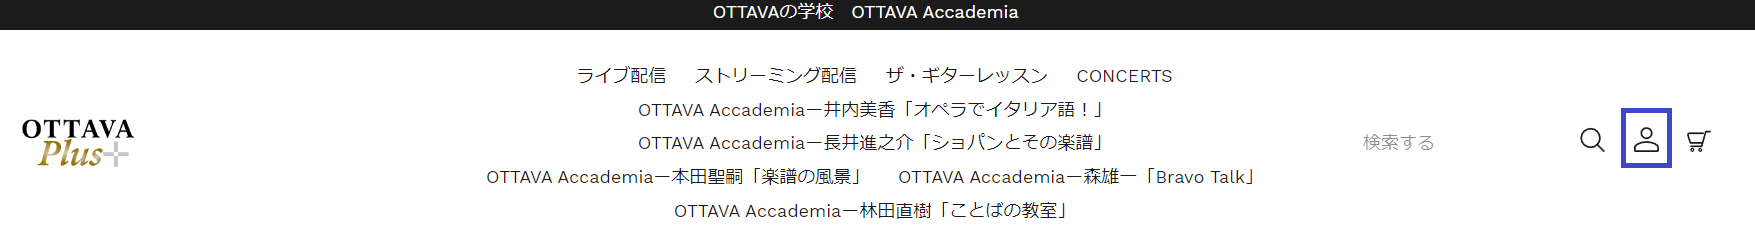 Accademiaログイン_1.png